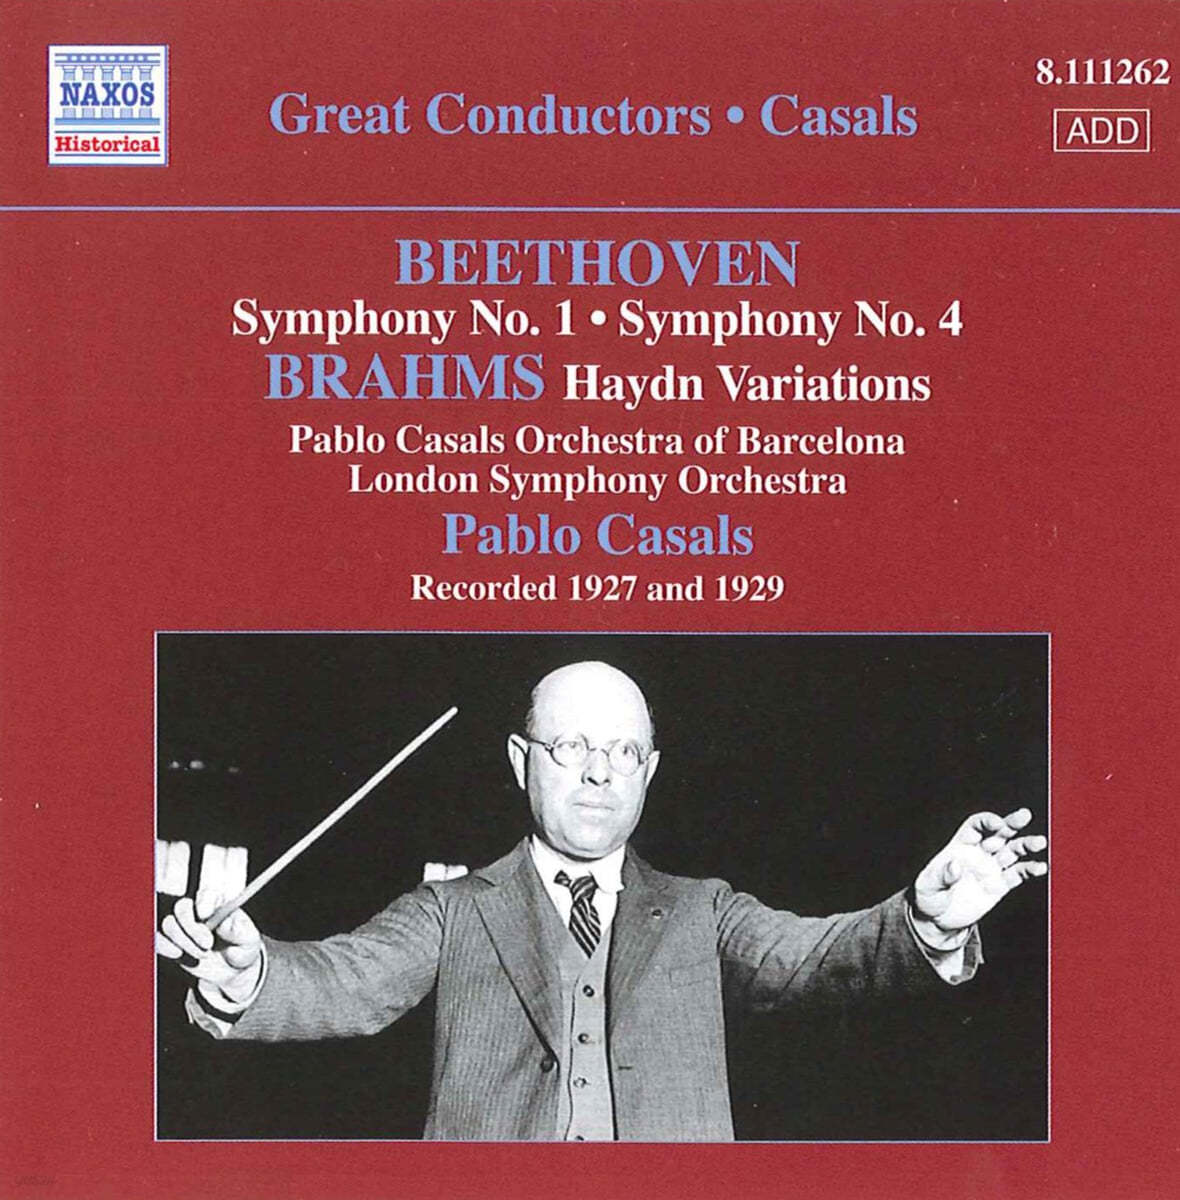 Pablo Casals 베토벤: 교향곡 1, 4번 / 브람스: 하이든 변주곡 (Beethoven: Symphonies Op.21, Op.60 / Brahms: Variations on a Theme by Haydn, Op. 56a, "St. Anthony Variations") 